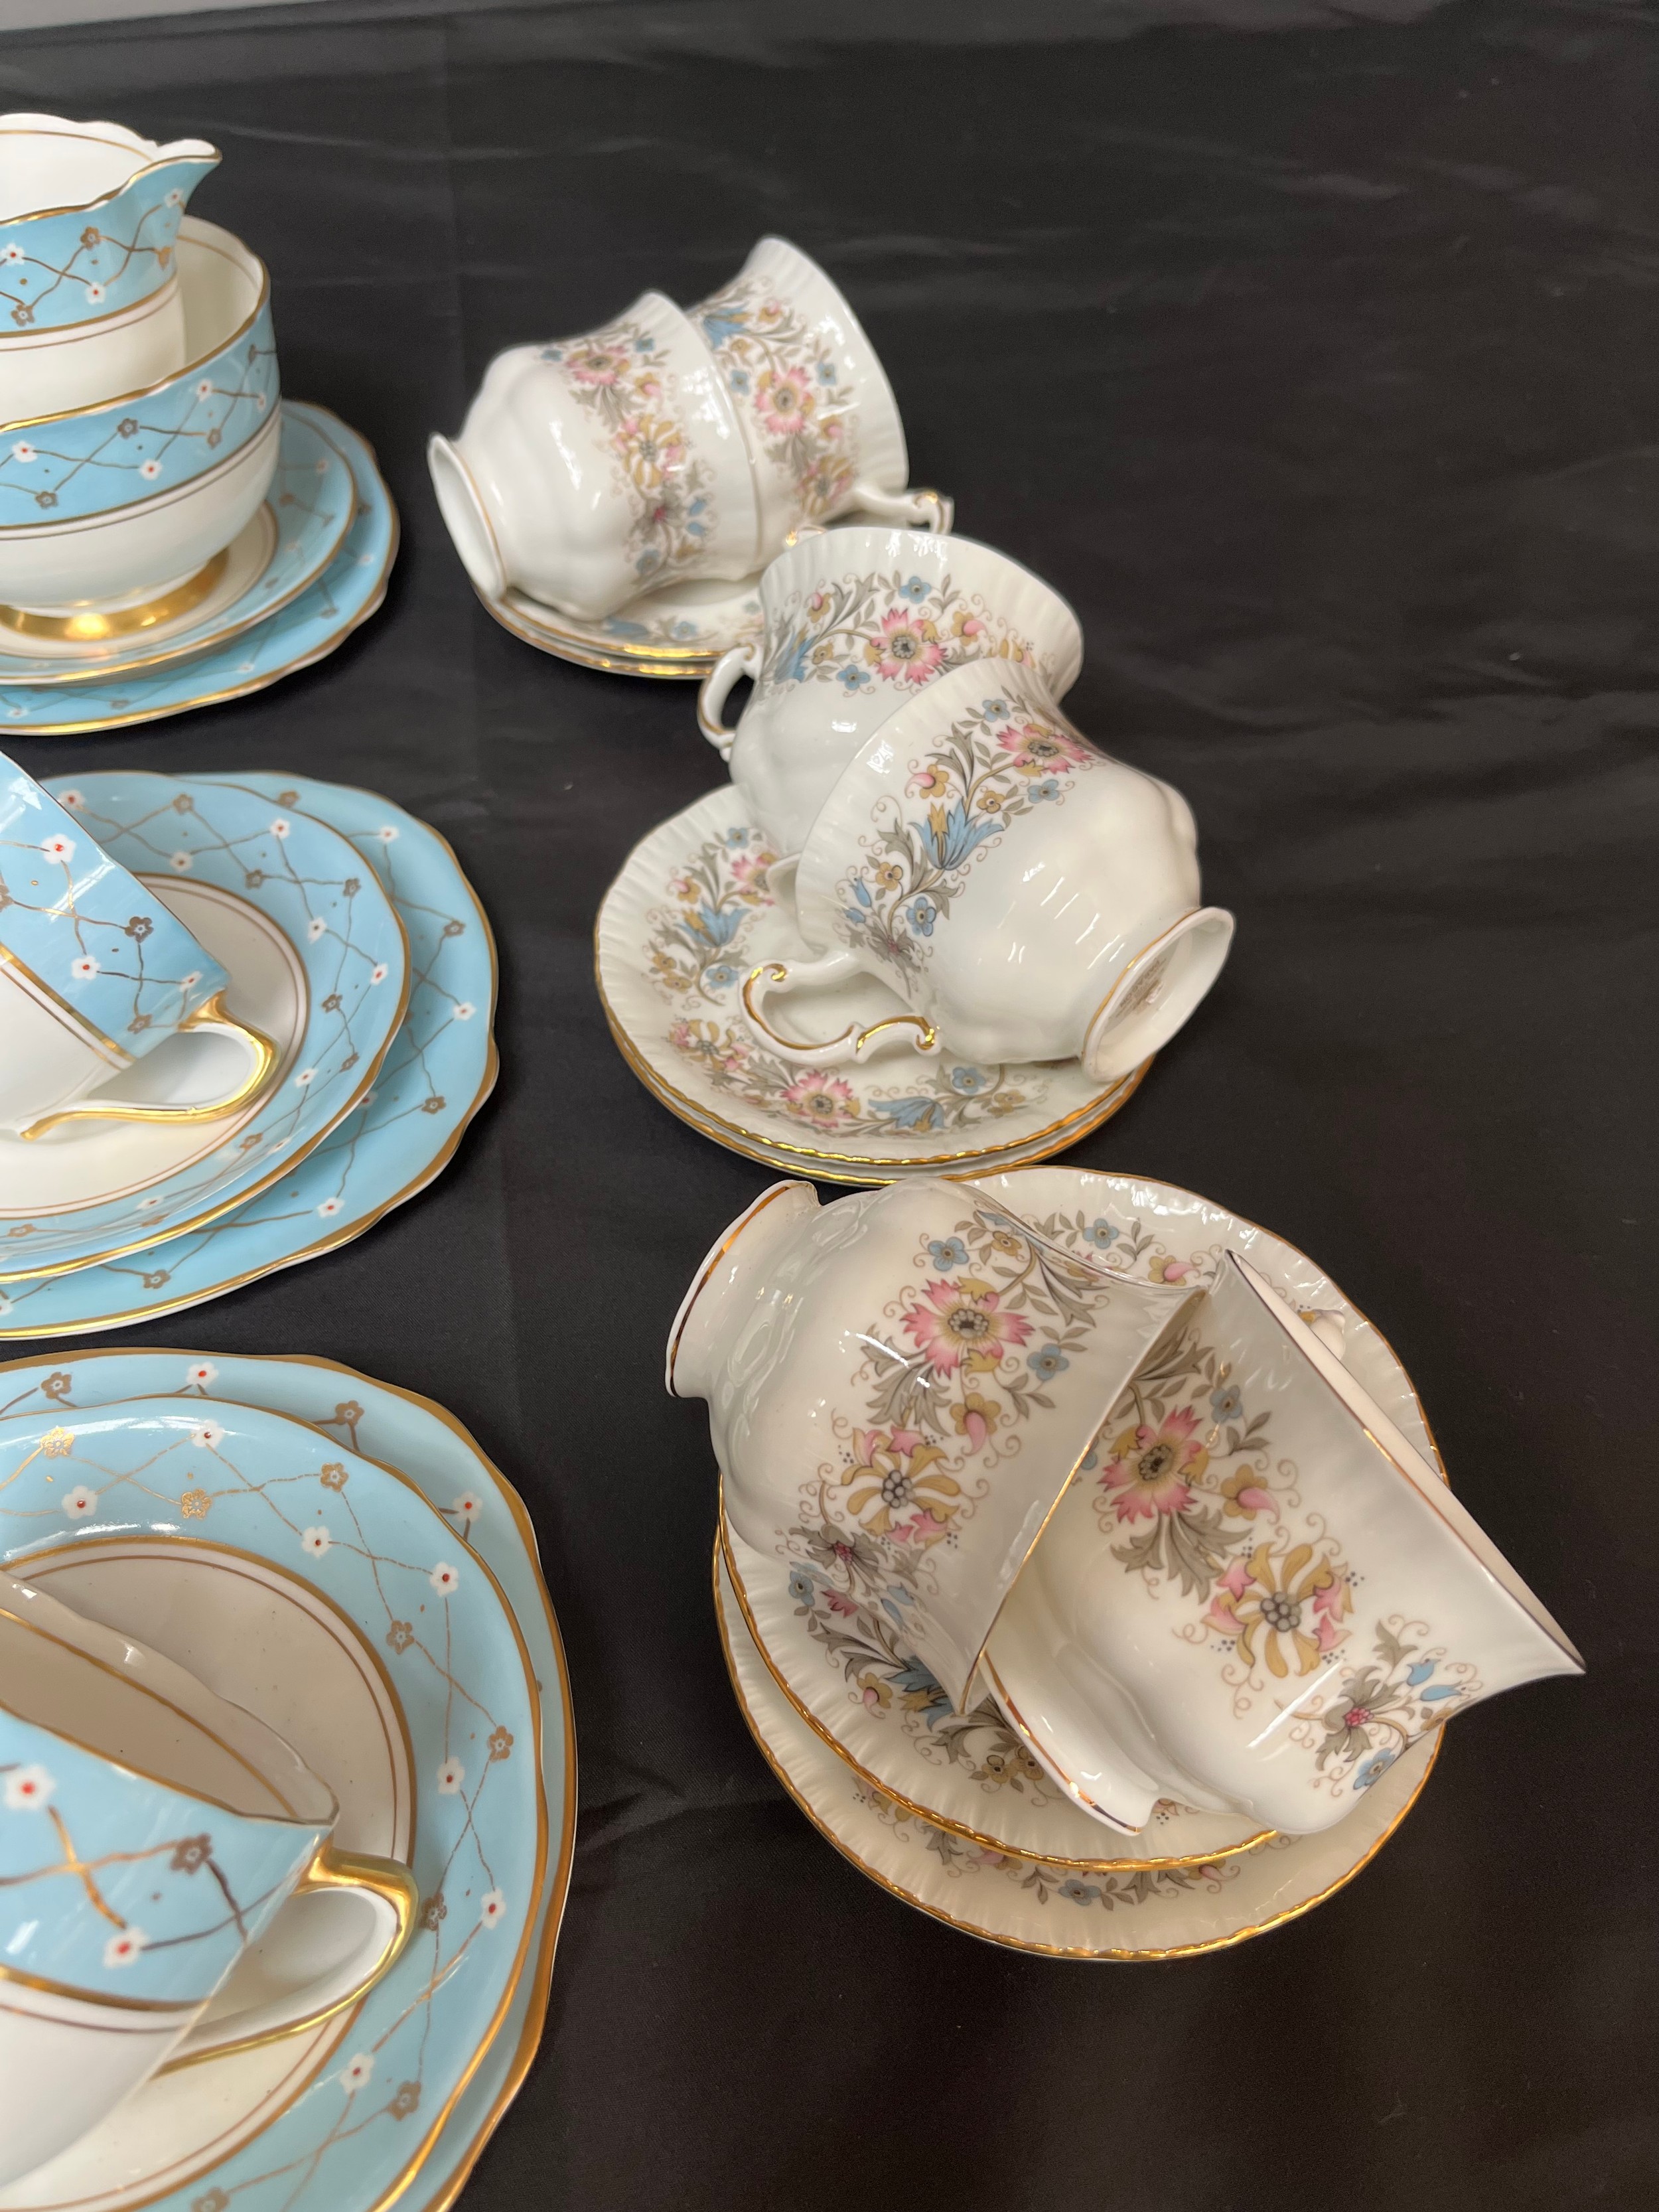 An 18 piece Royal Stafford tea set together with a 12 piece Paragon Meadowvale coffee set. - Image 3 of 3